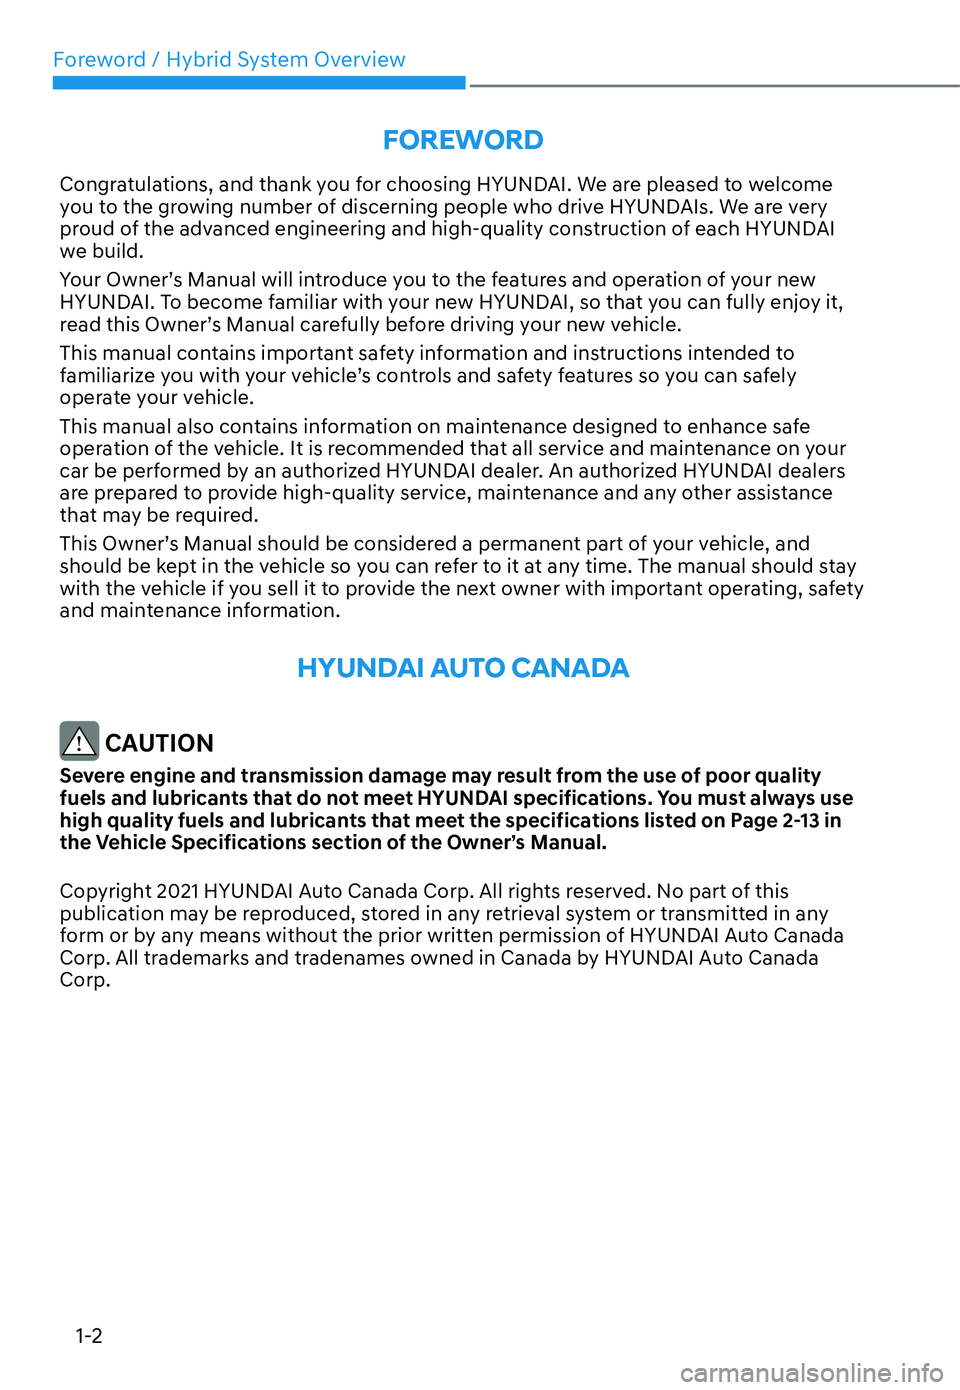 HYUNDAI SANTA FE HYBRID 2022  Owners Manual Foreword / Hybrid System Overview
1-2
FOREWORD
Congratulations, and thank you for choosing HYUNDAI. We are pleased to welcome  
you to the growing number of discerning people who drive HYUNDAIs. We ar